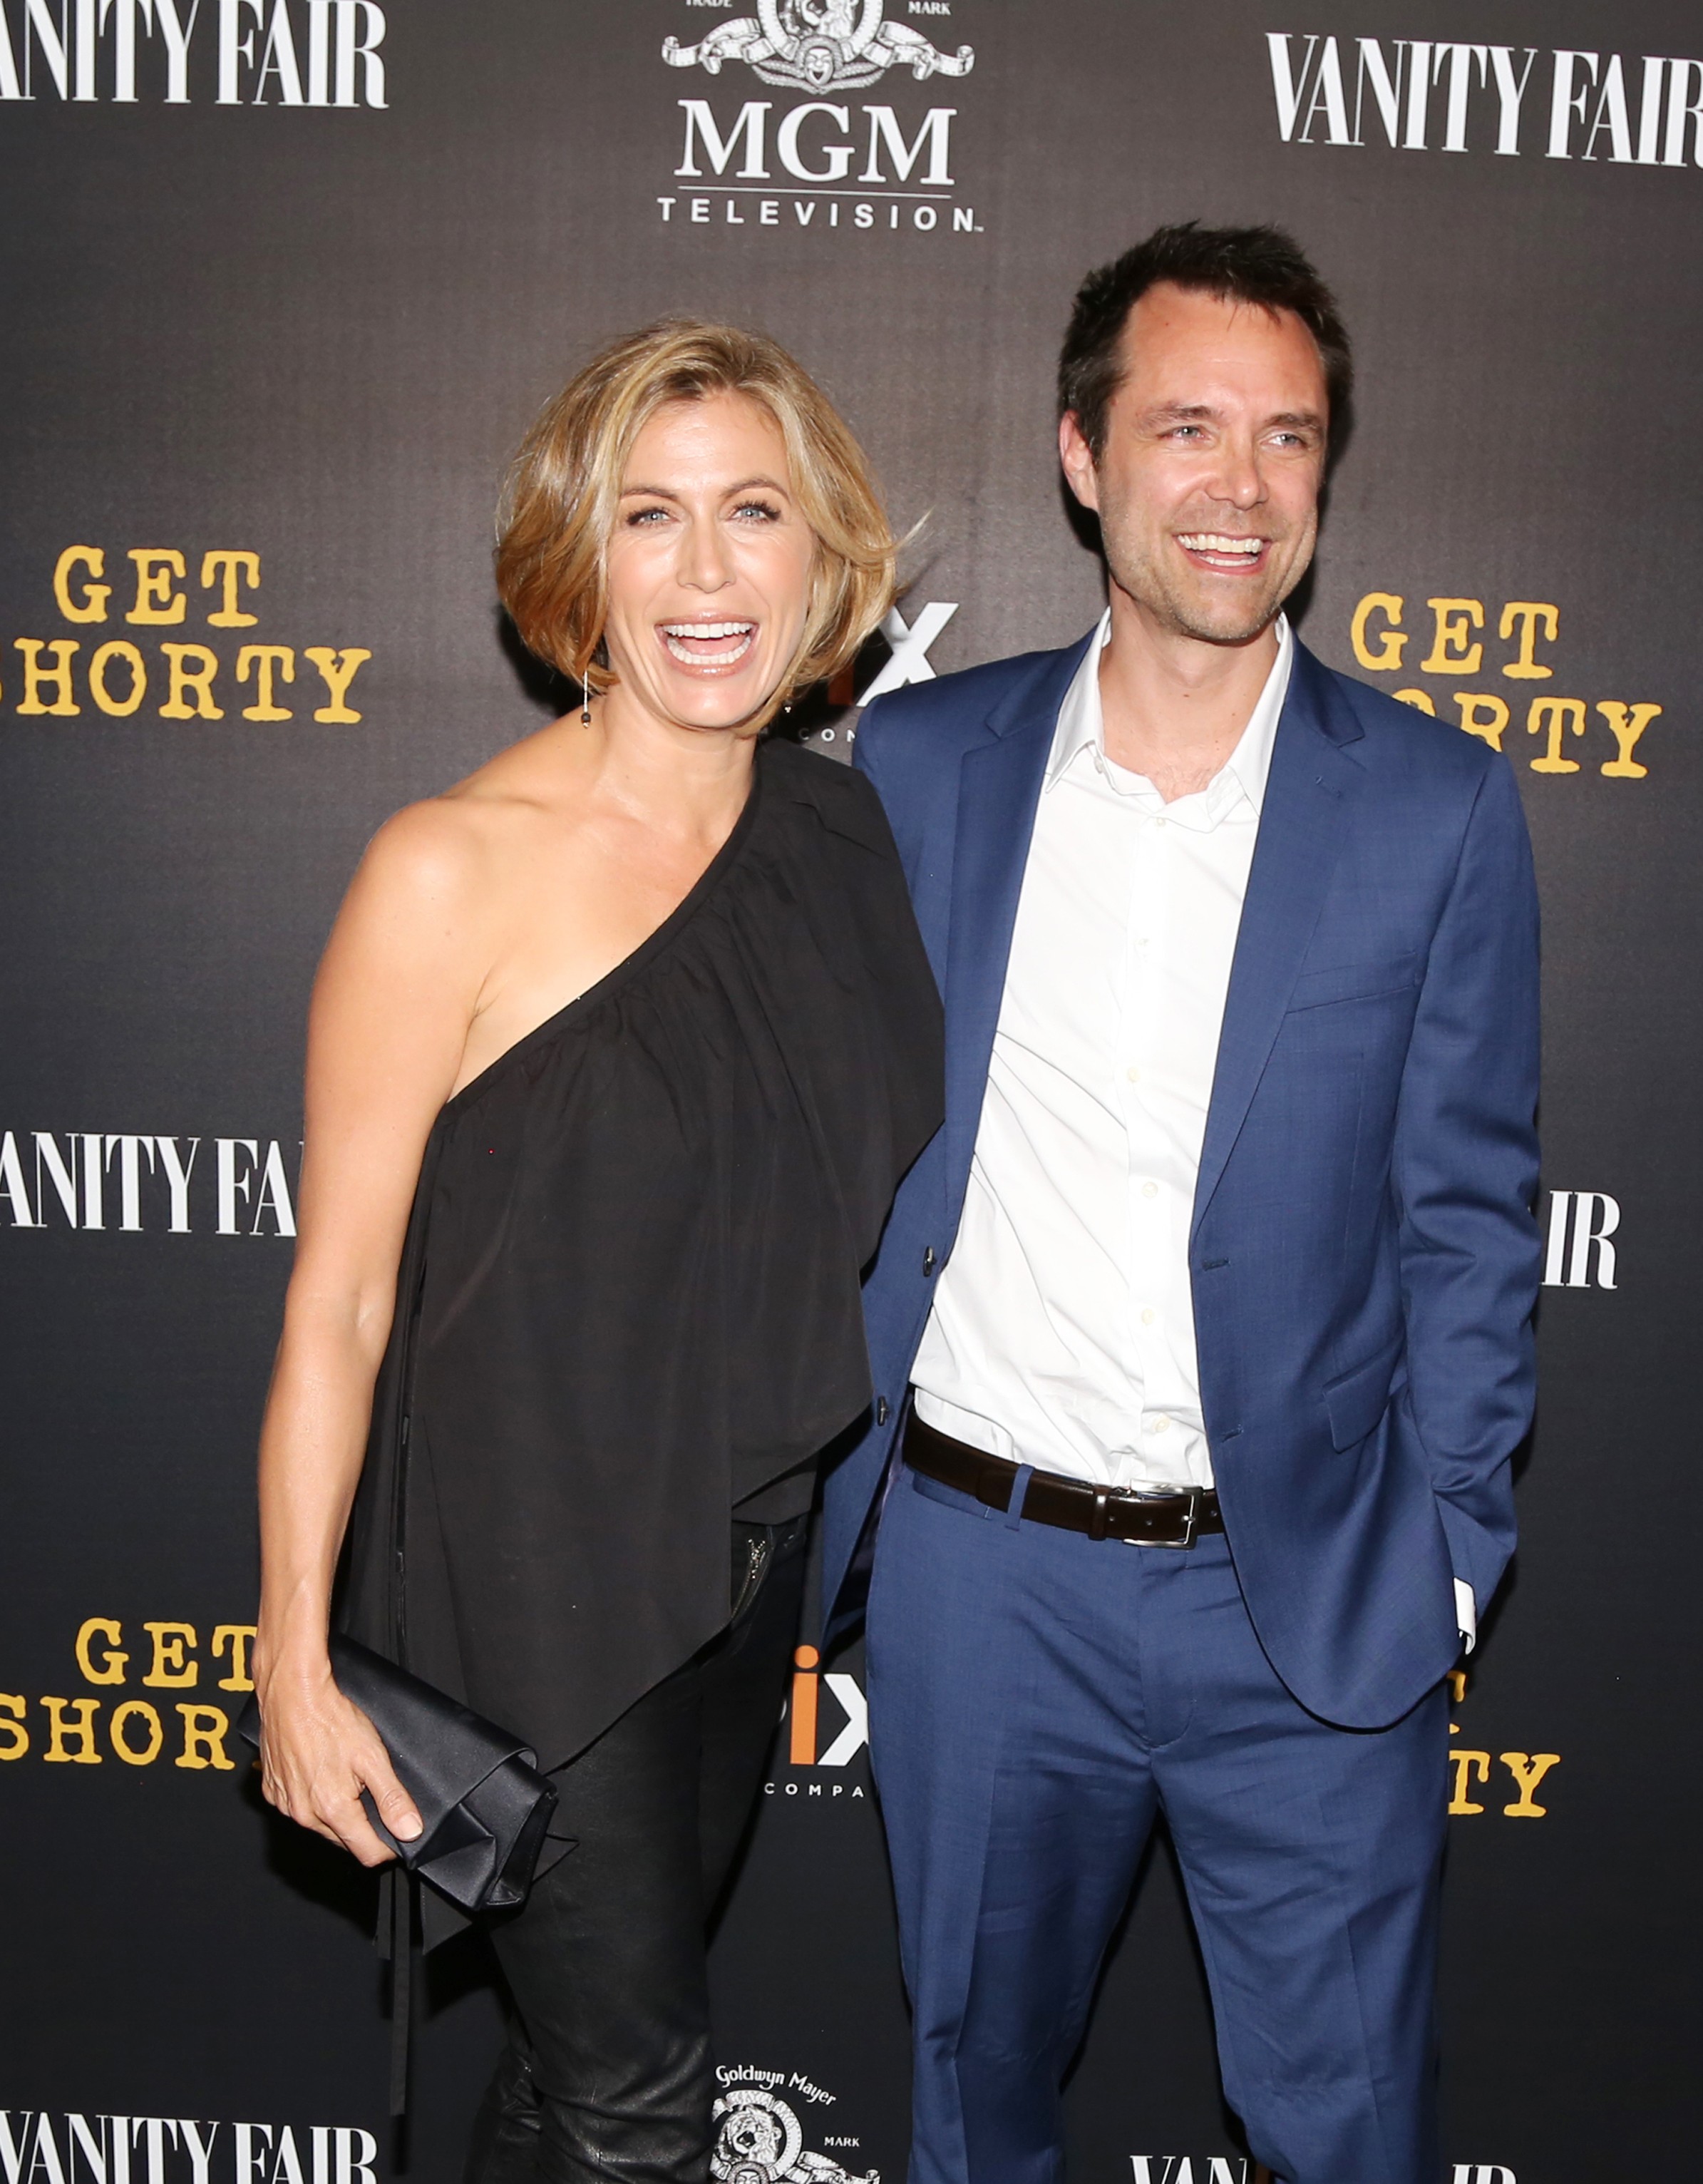 Sonya Walger at the premiere of Get Shorty